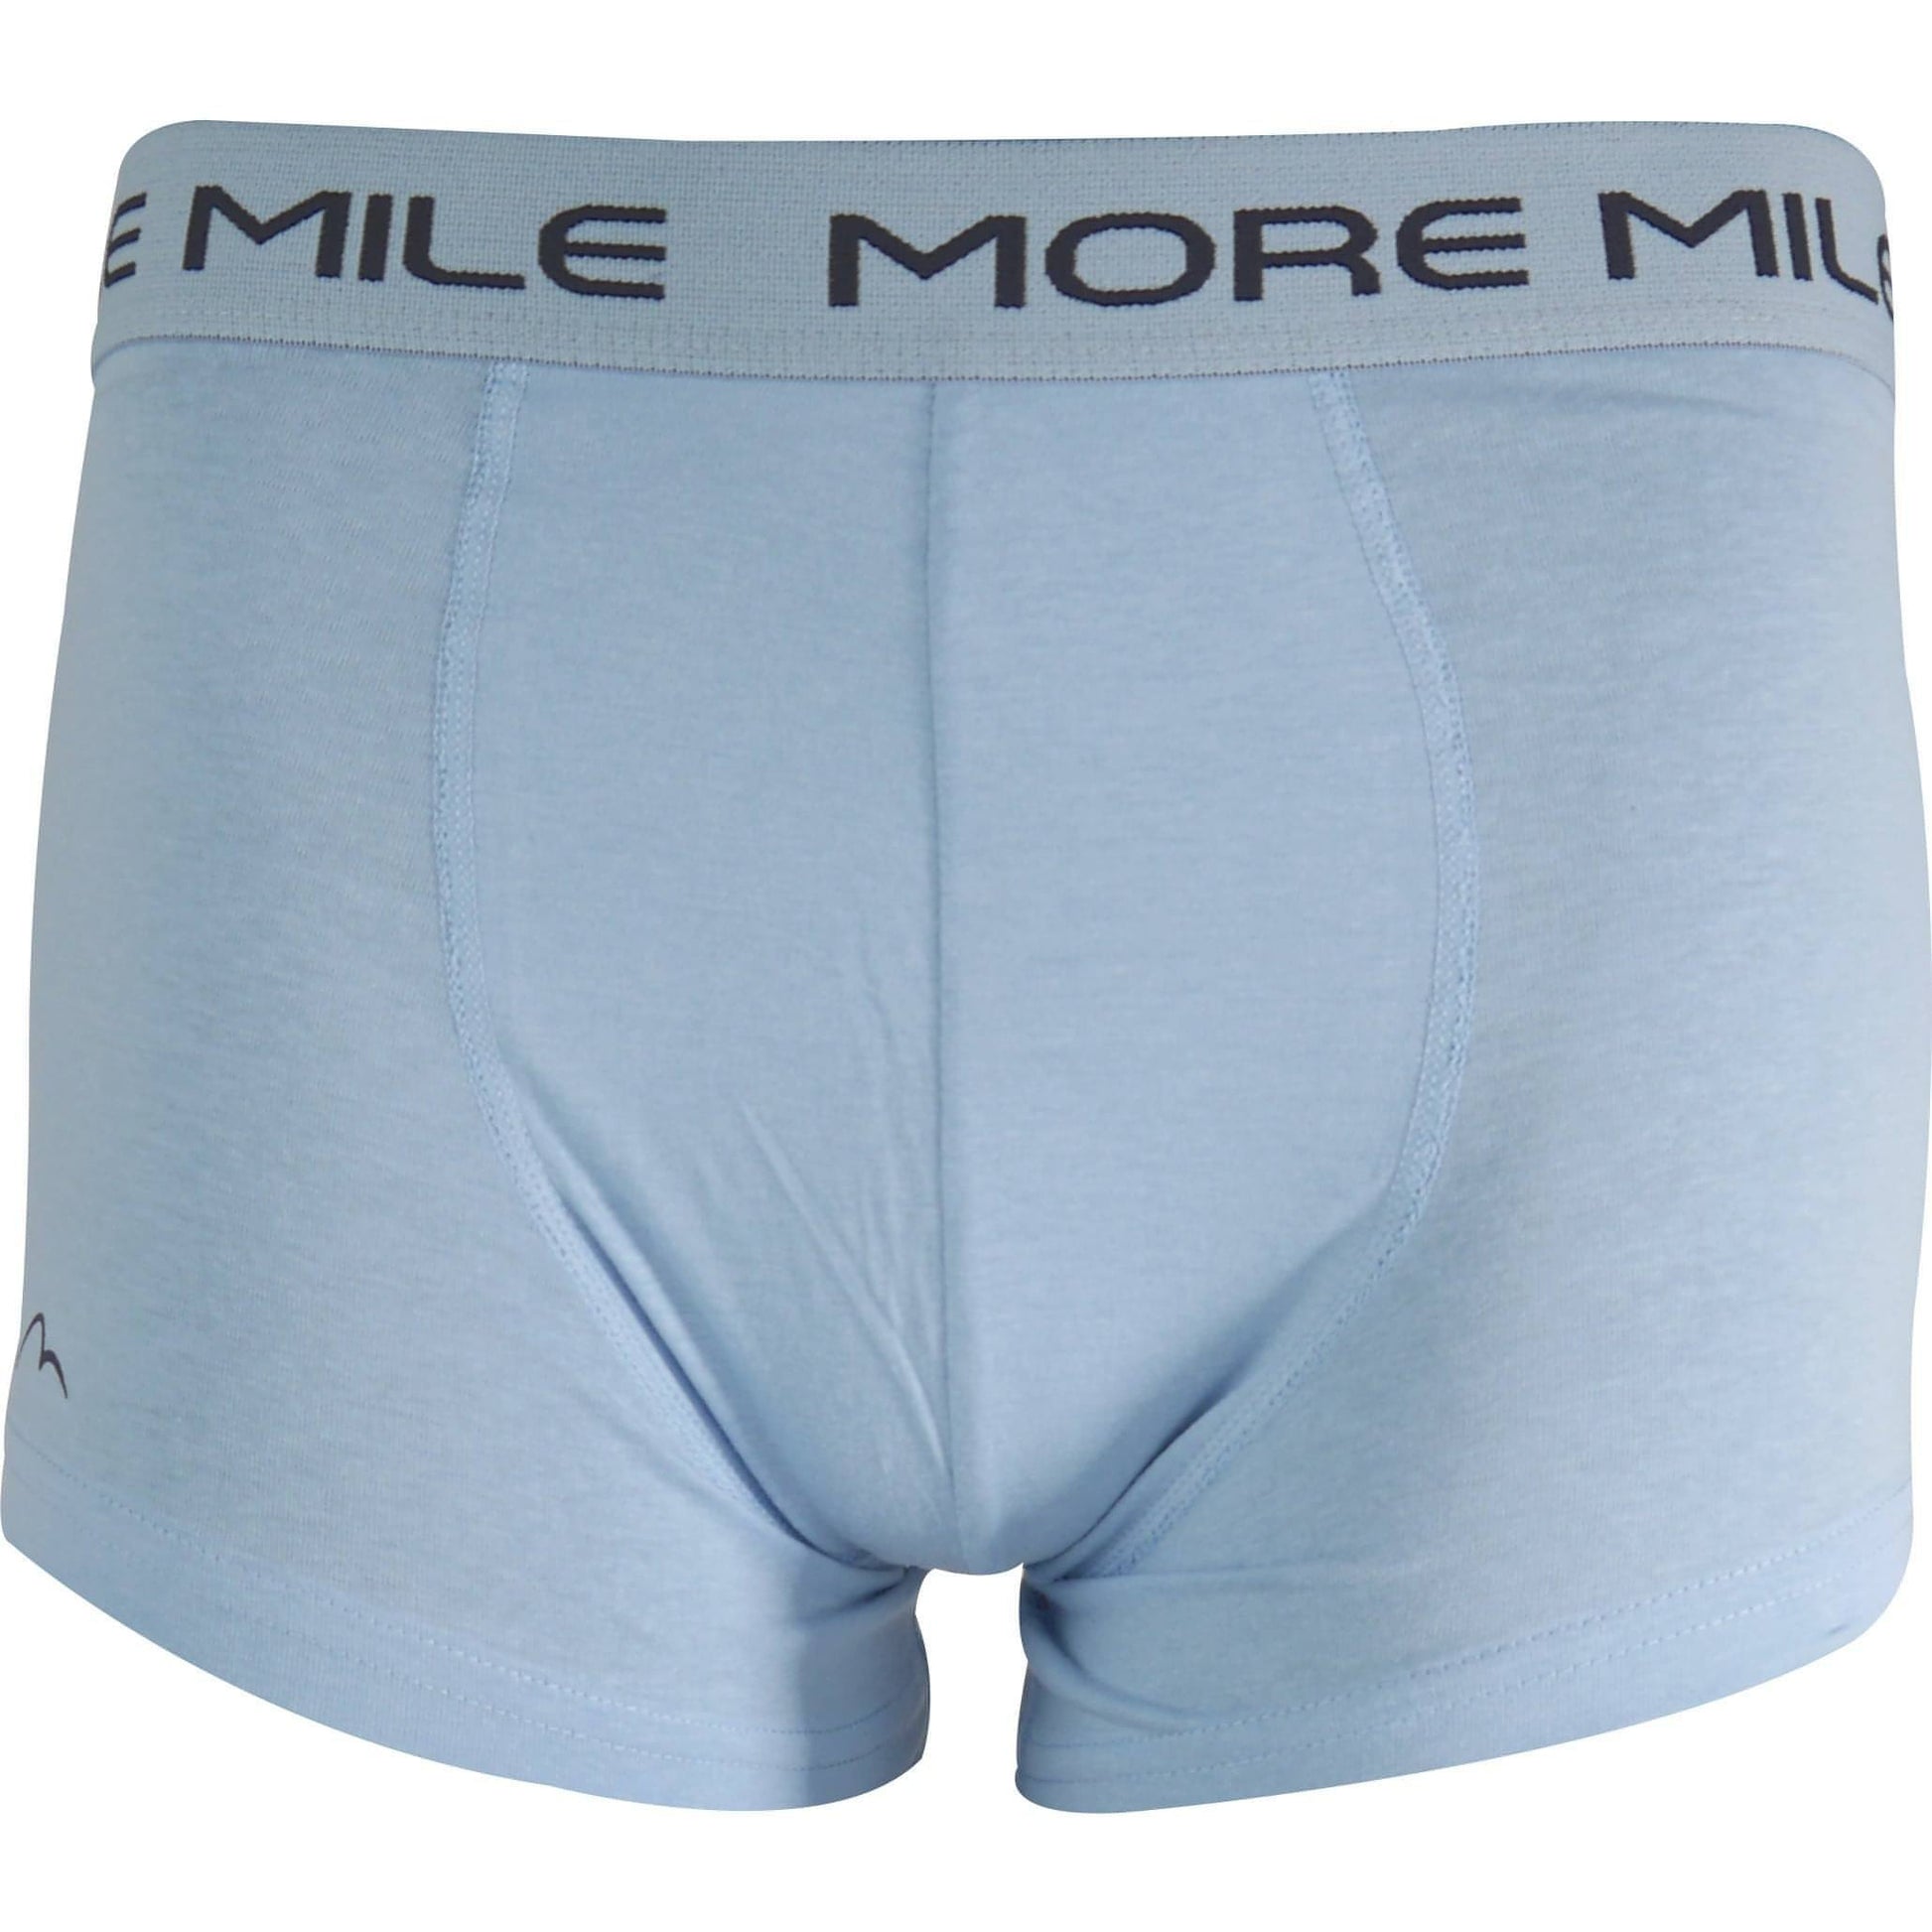 More Mile Pack Boxer 1P204881Wn Bluenavy Bluebell Front - Front View